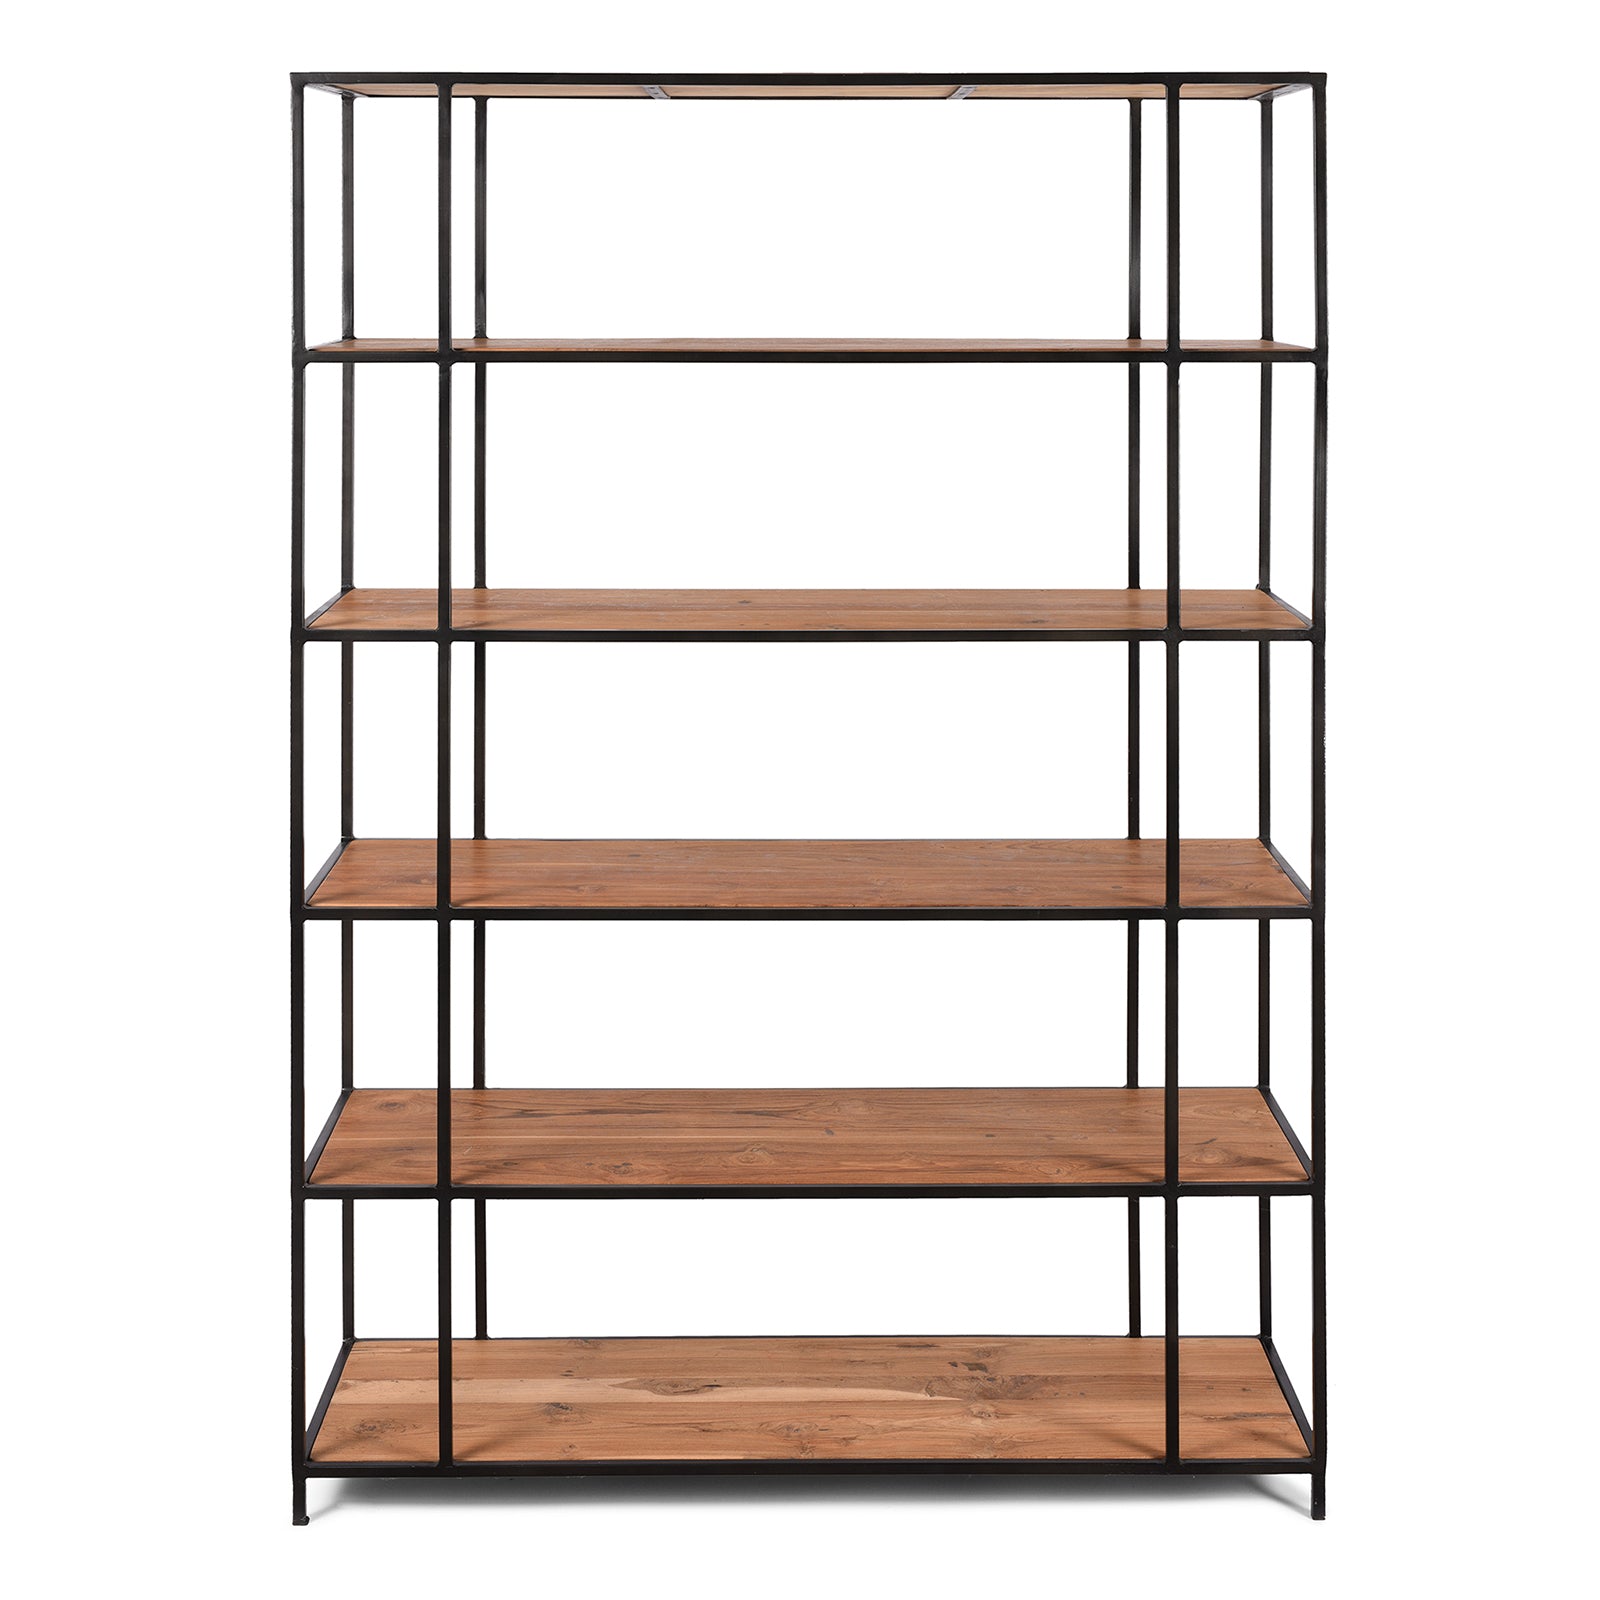 Industrial Style Room Divider Shelving | INDIGO ANTIQUES